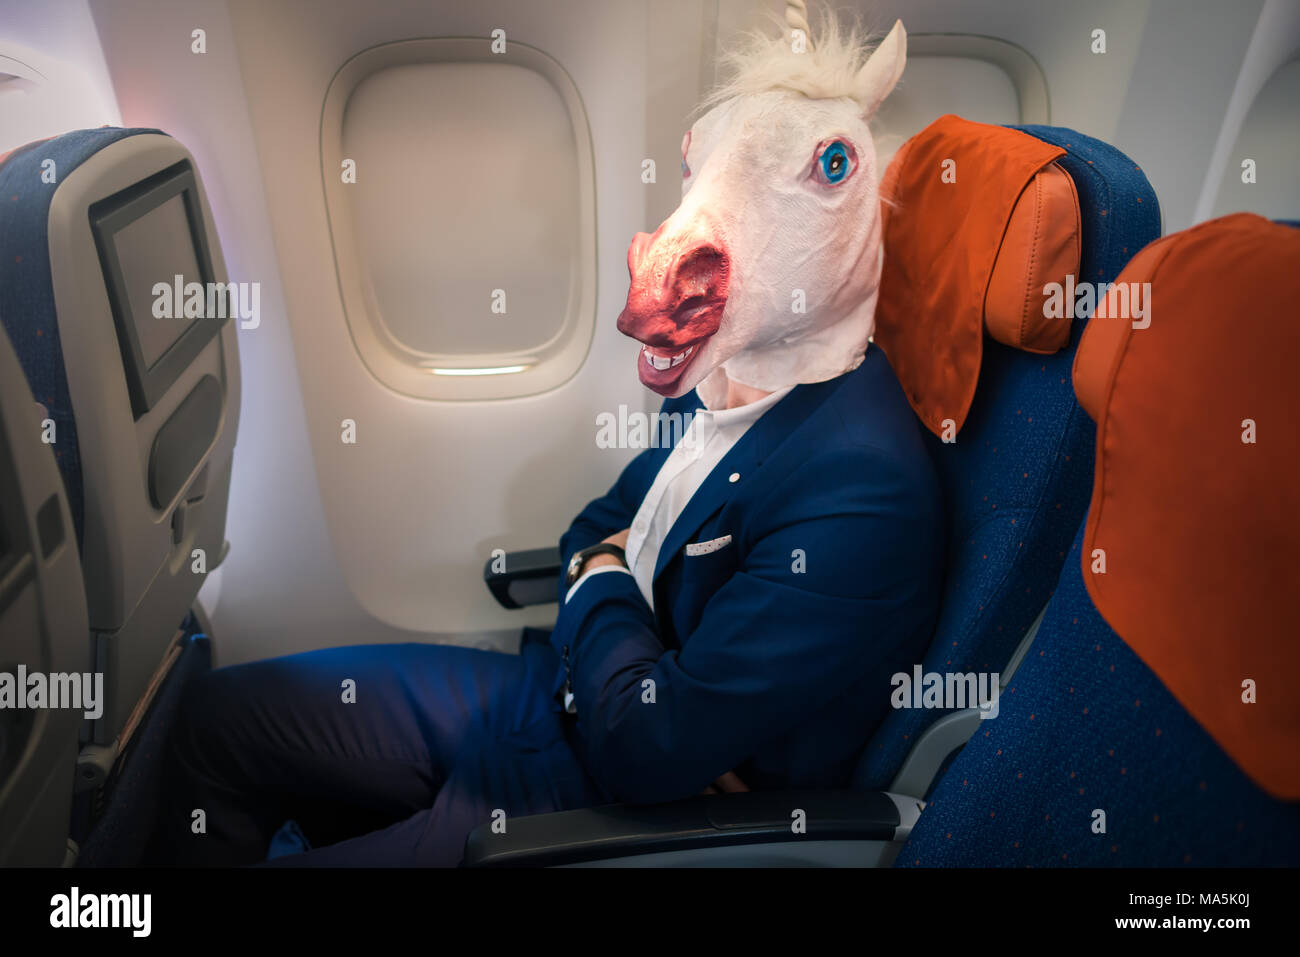 Strange passenger in elegant suit sits alone inside the aircraft and ready to take off. Unusual traveler in air voyage. Stock Photo